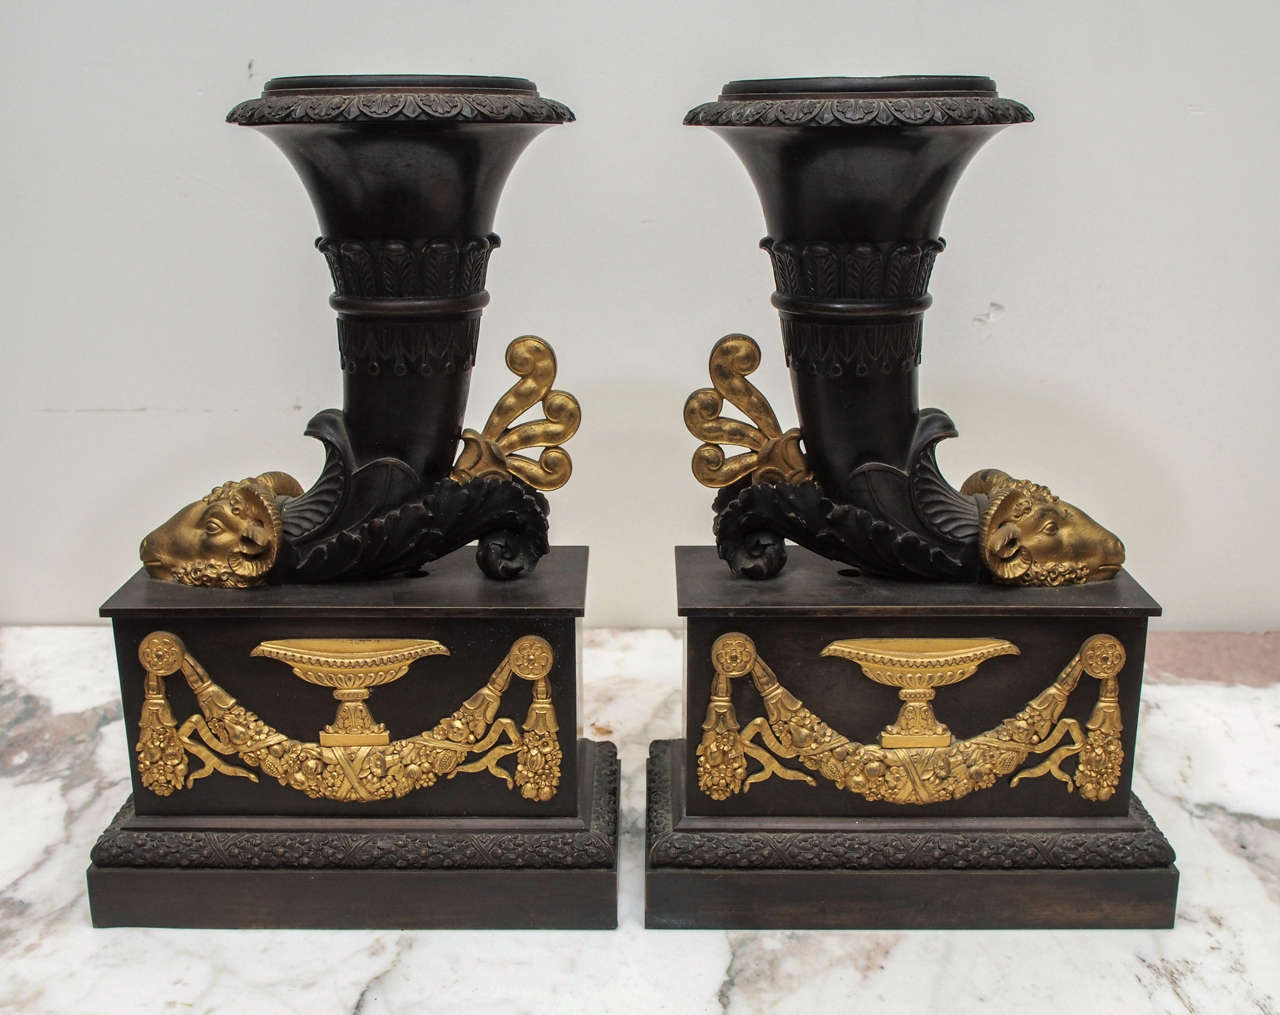 Pair of French 19th c. Classical Cornucopia Form Vases with Rams Heads and Folate Swags and urn decoration in Gilt Bronze on Patinated Bronze.